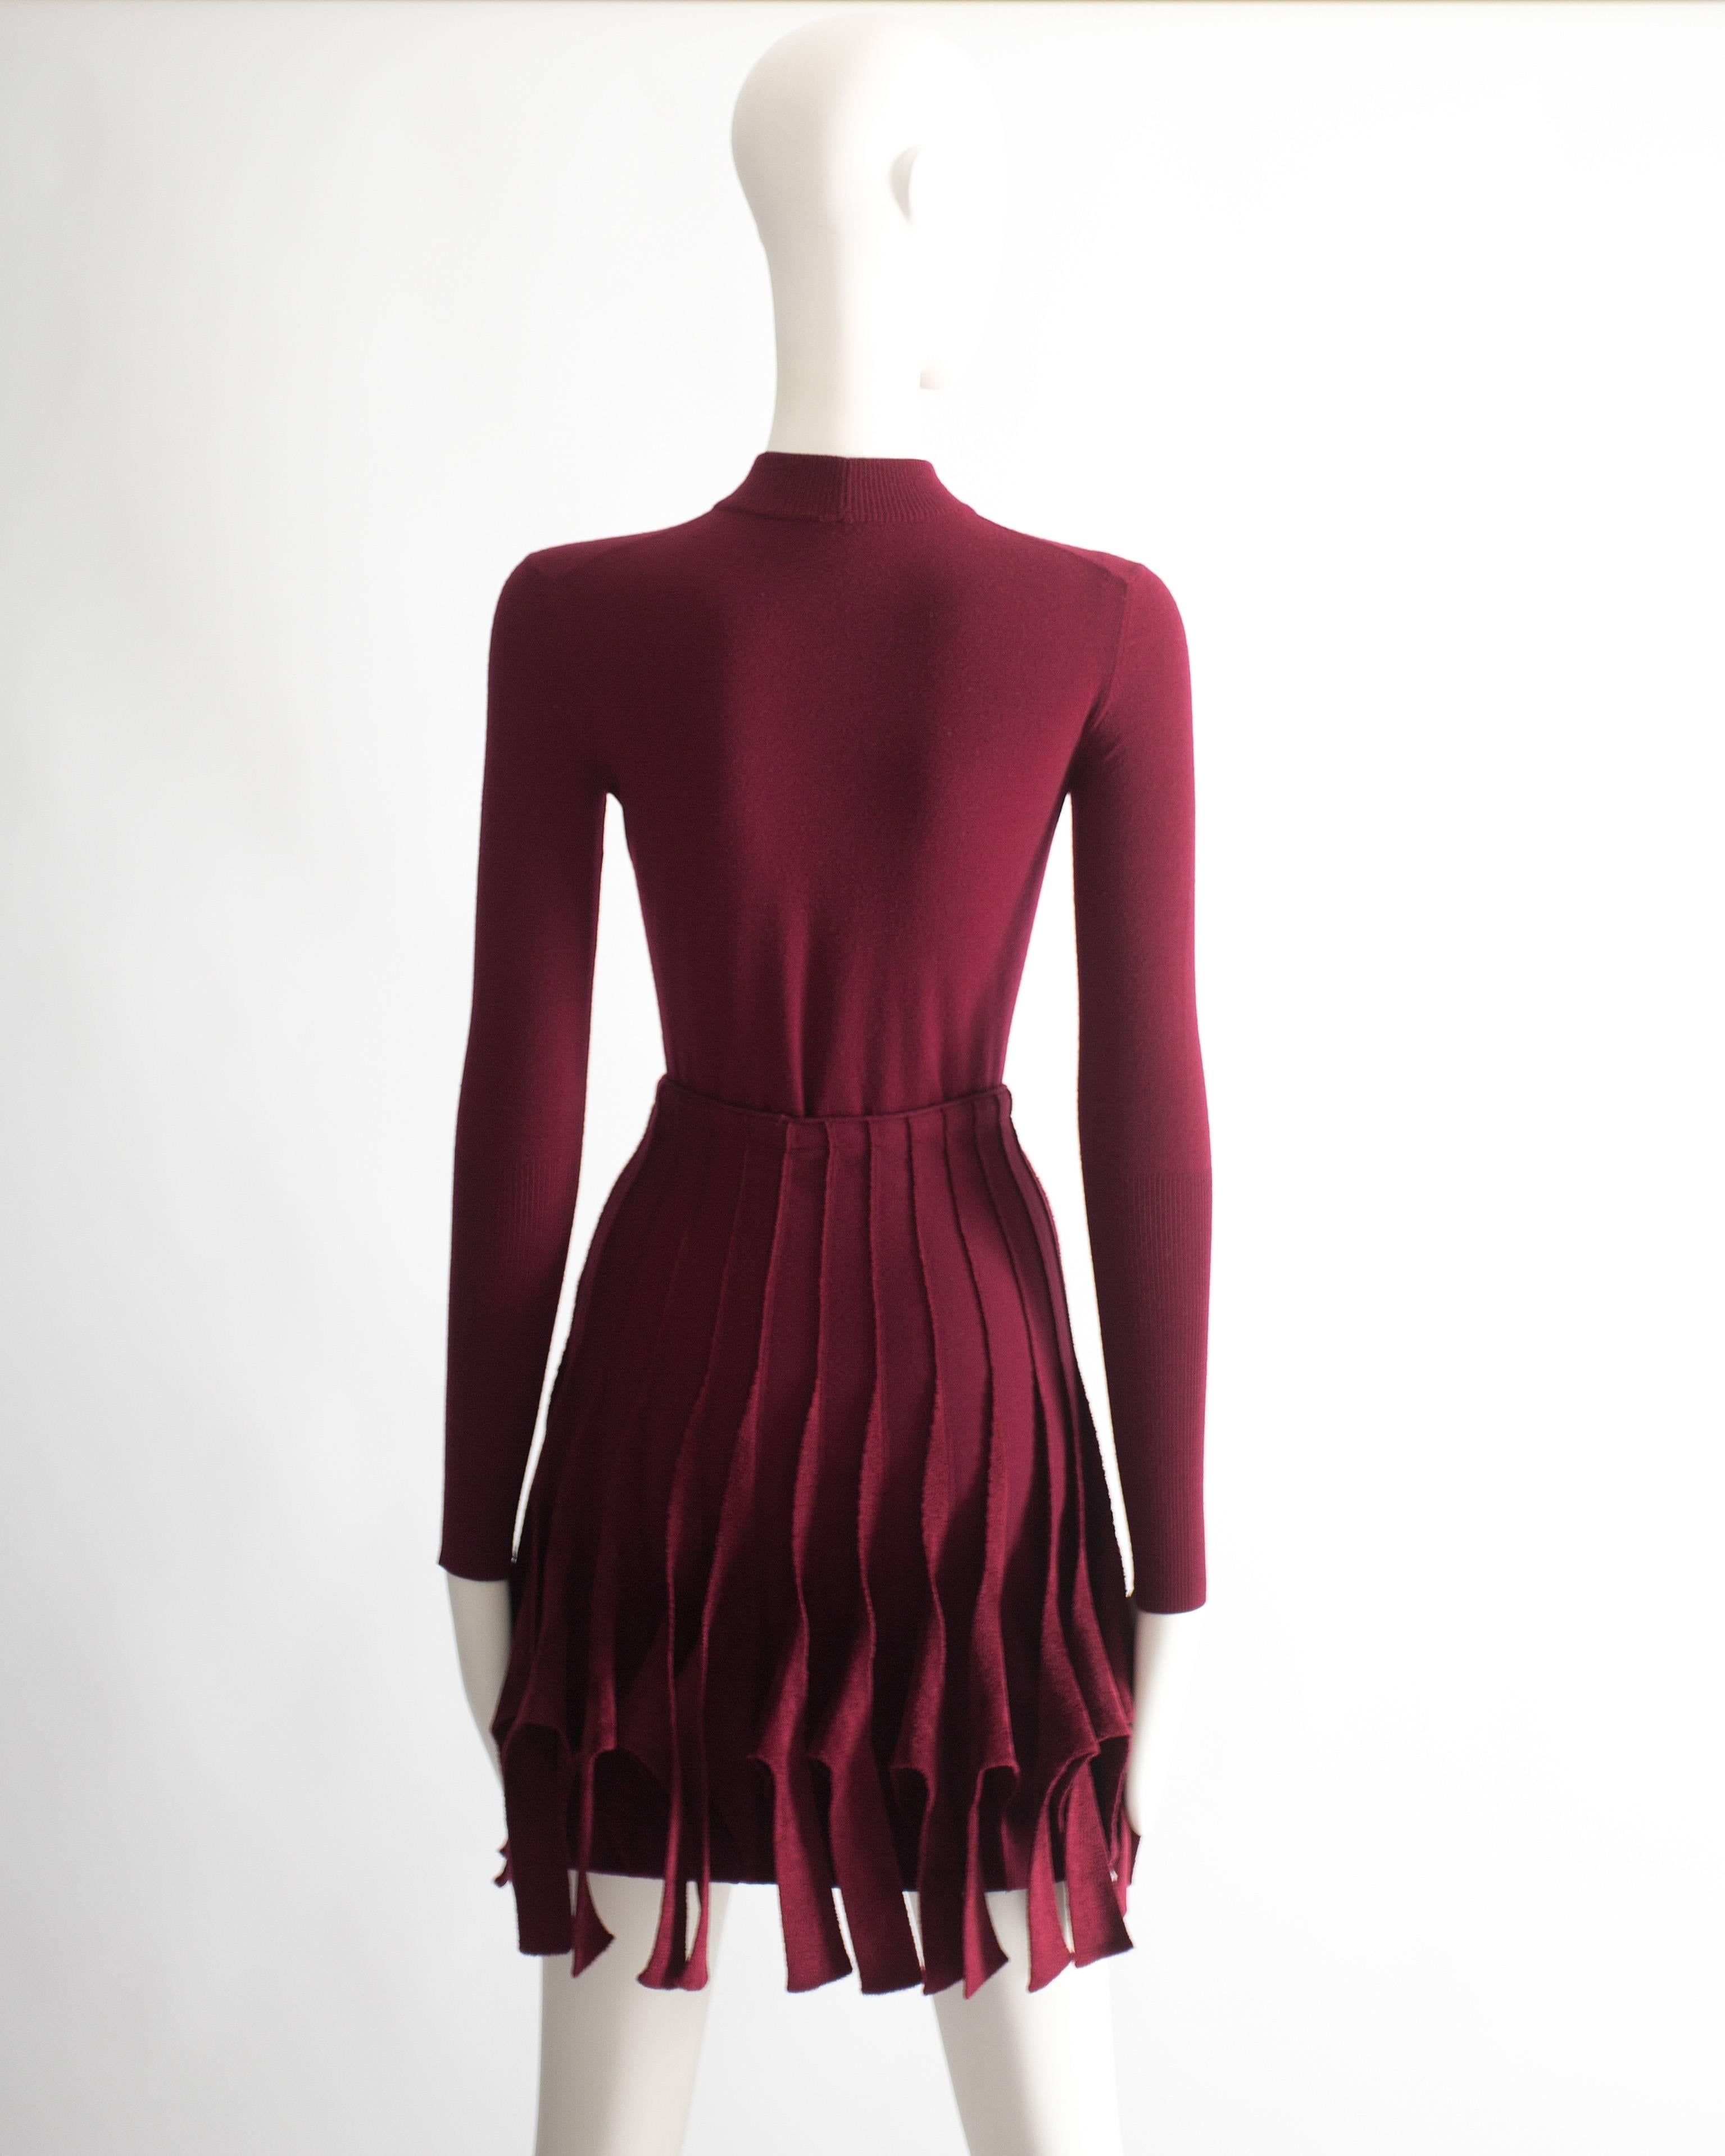 Alaia maroon chenille and wool body and skirt ensemble 2